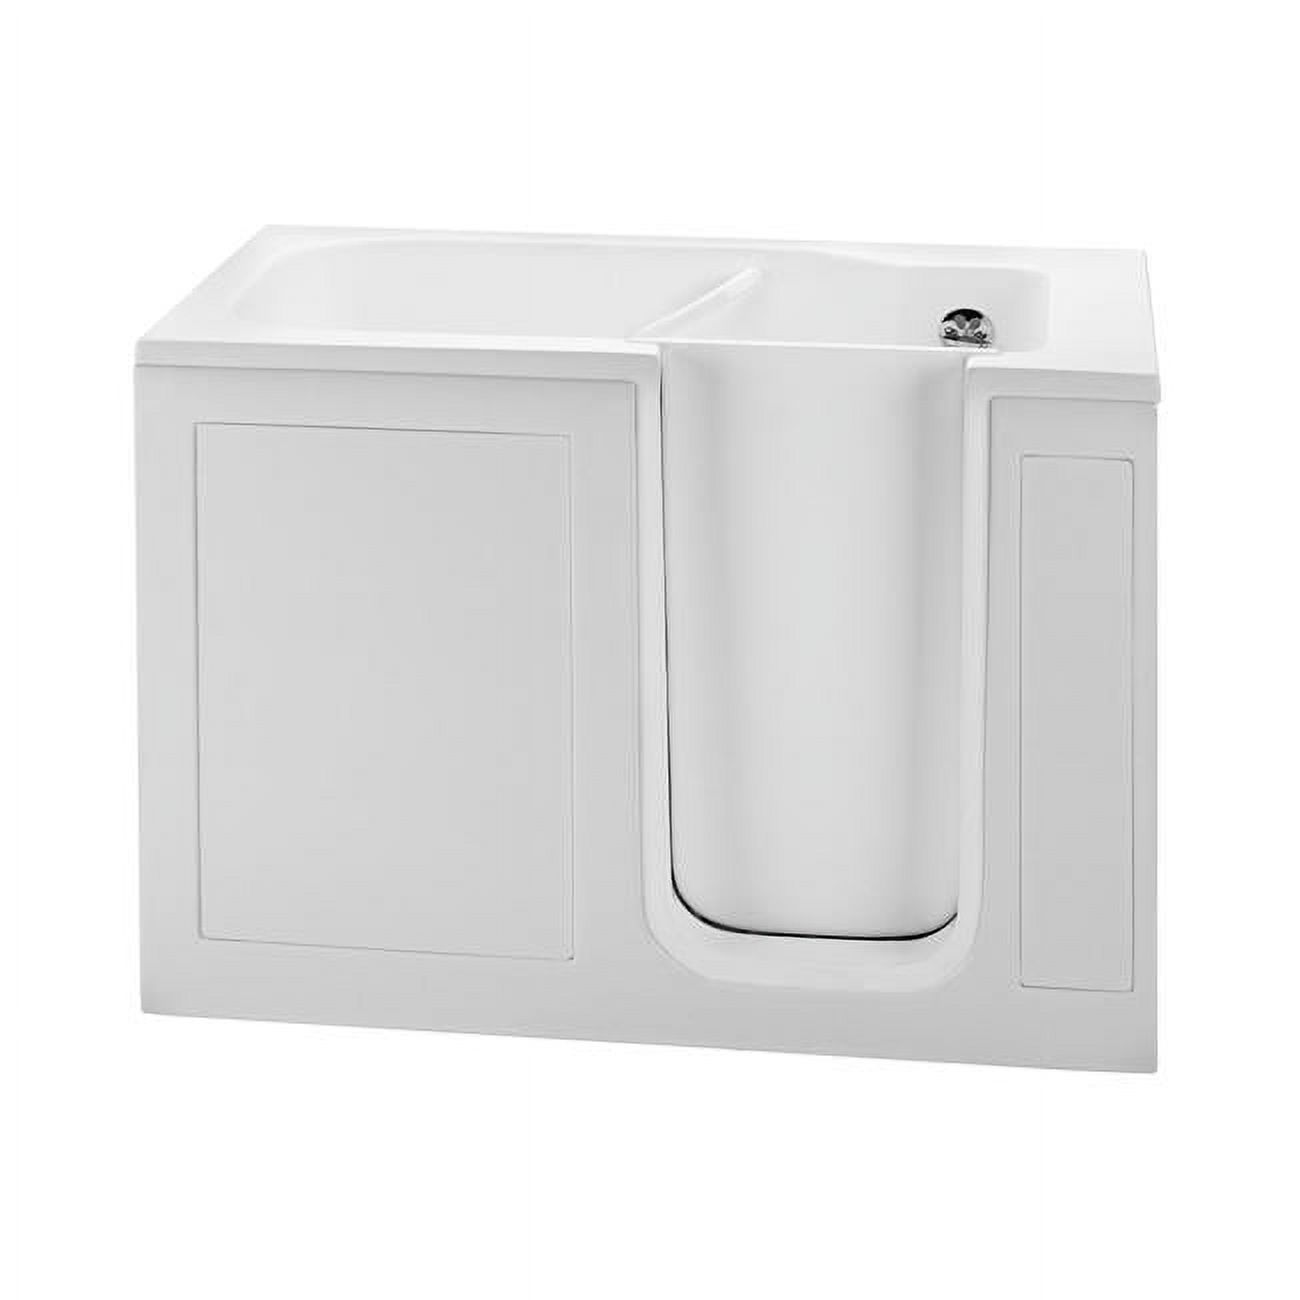 Walk in Air Bath WP Combo with Radiance No valves, White - 51.5 x 30.25 x 37.5 in. - image 1 of 1